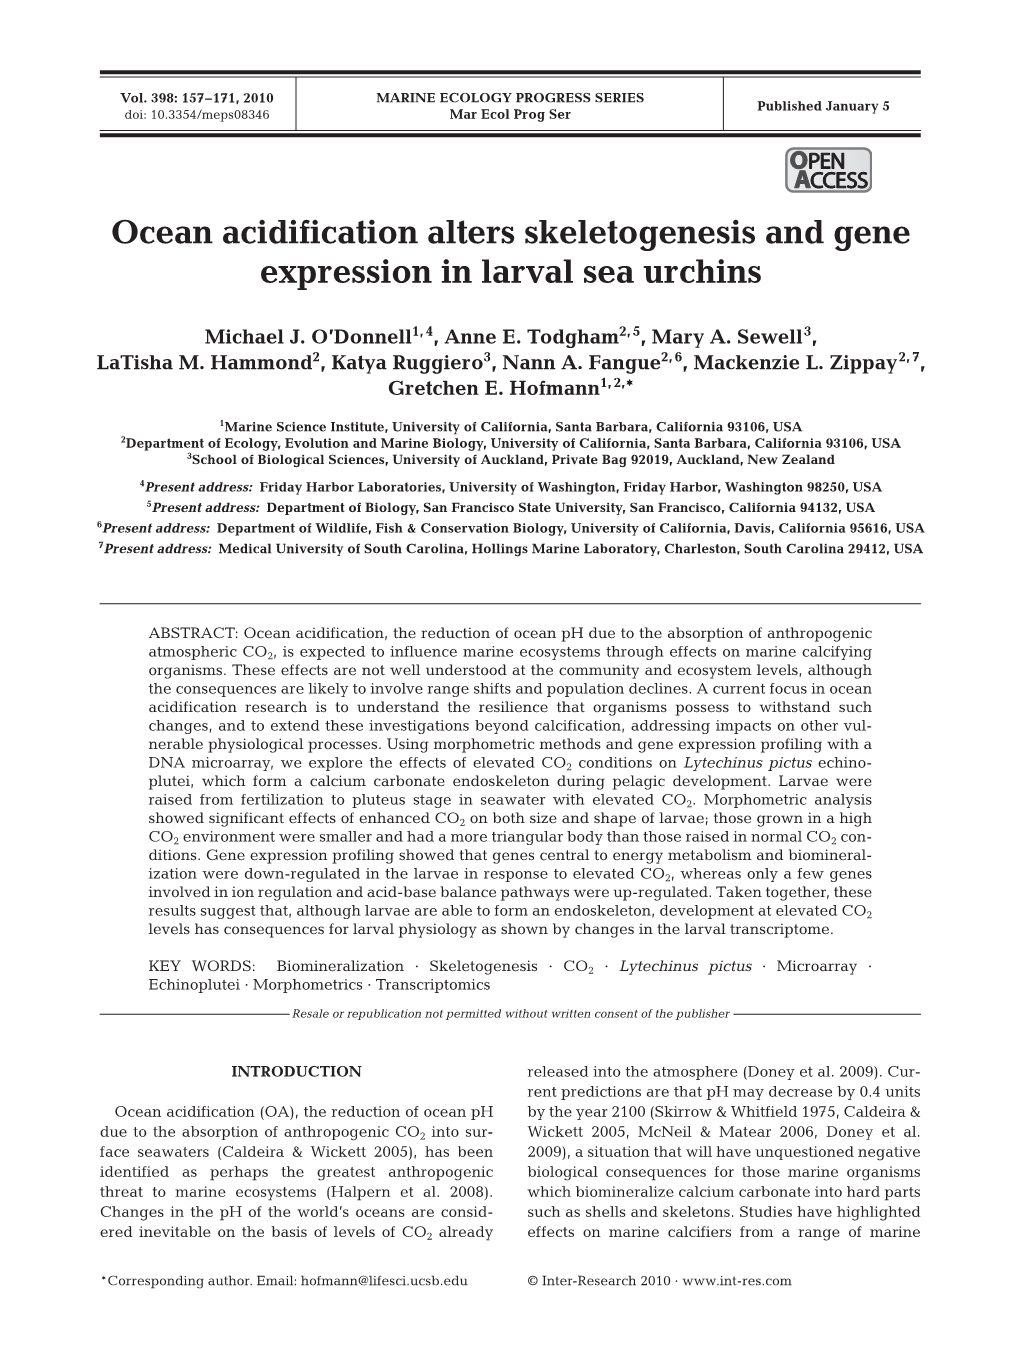 Ocean Acidification Alters Skeletogenesis and Gene Expression in Larval Sea Urchins